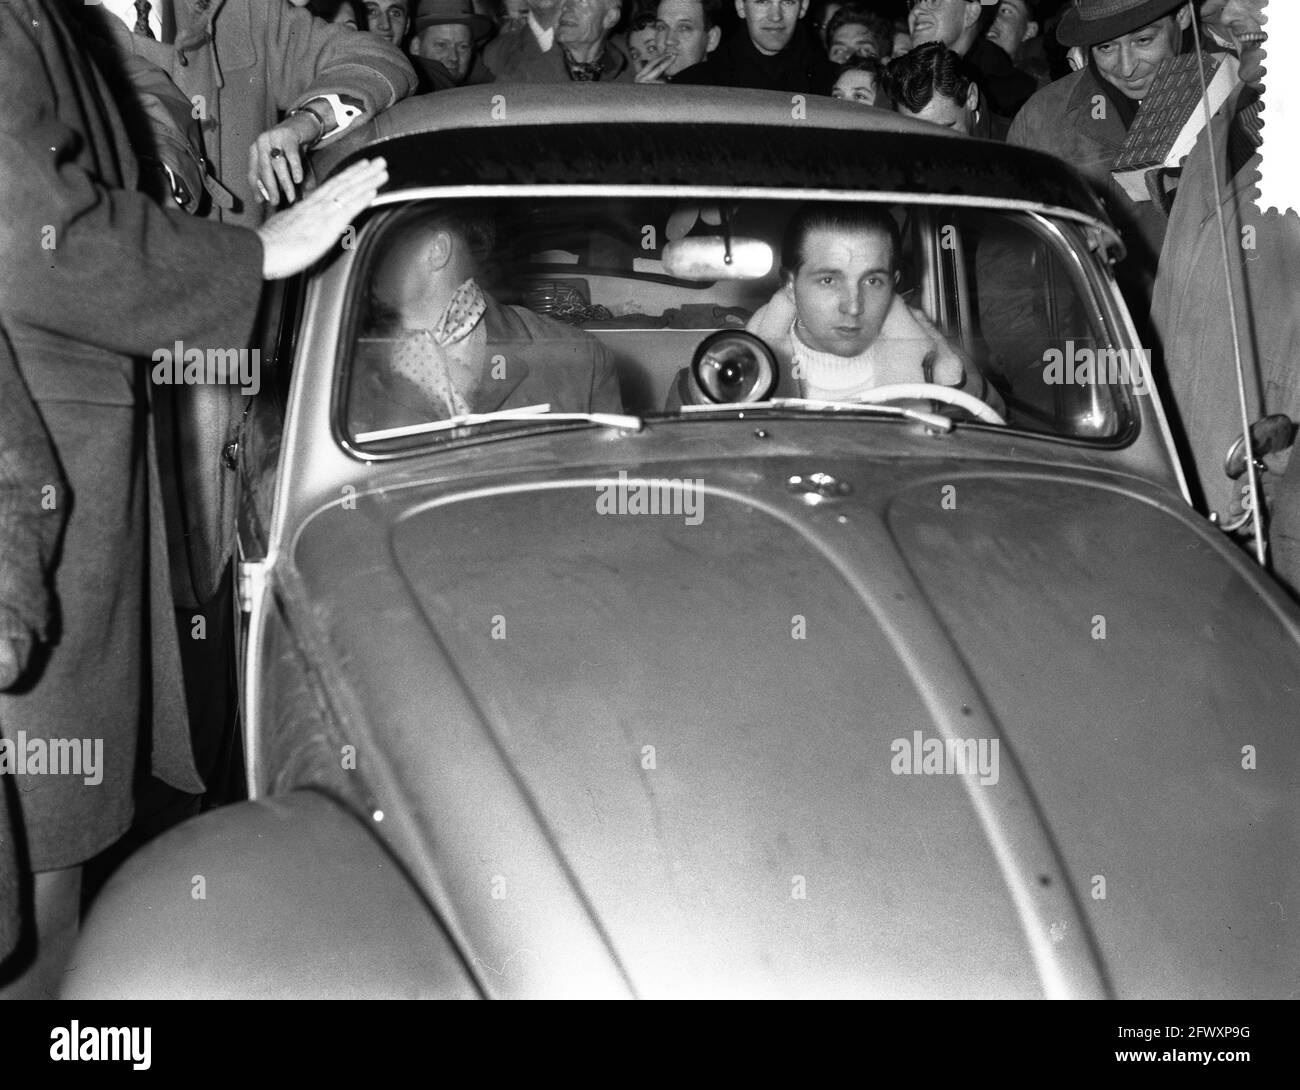 Rally Monte Carlo 1959 ( H. W. Megens jr. Ned.) co-driver B. M. Bremmers(Volkswagen), January 18, 1959, car rallies, The Netherlands, 20th century pre Stock Photo